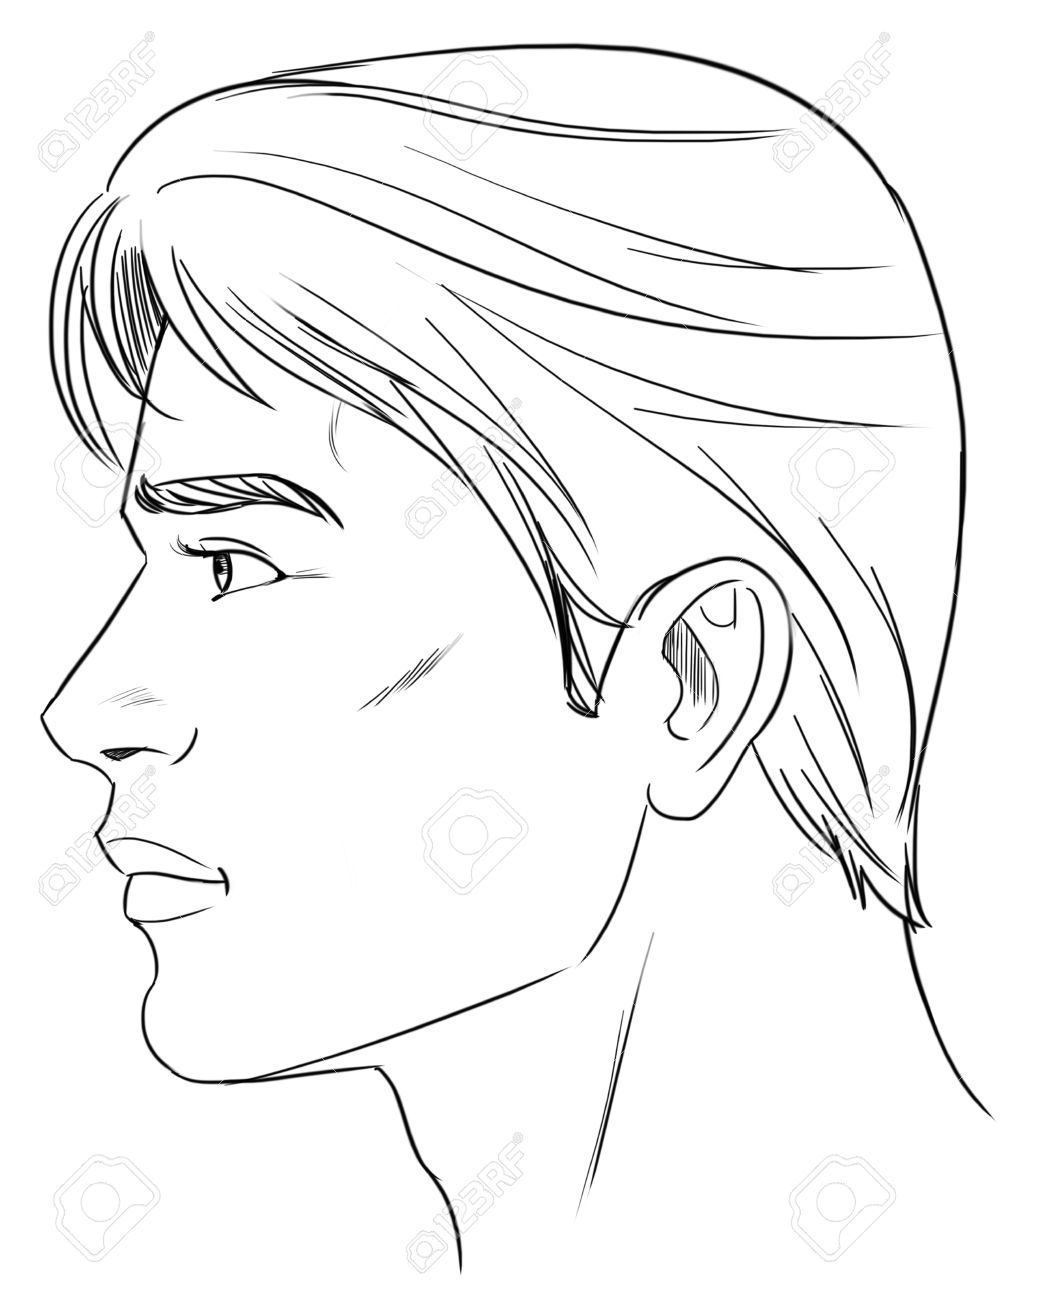 How to draw human face step by step pdf